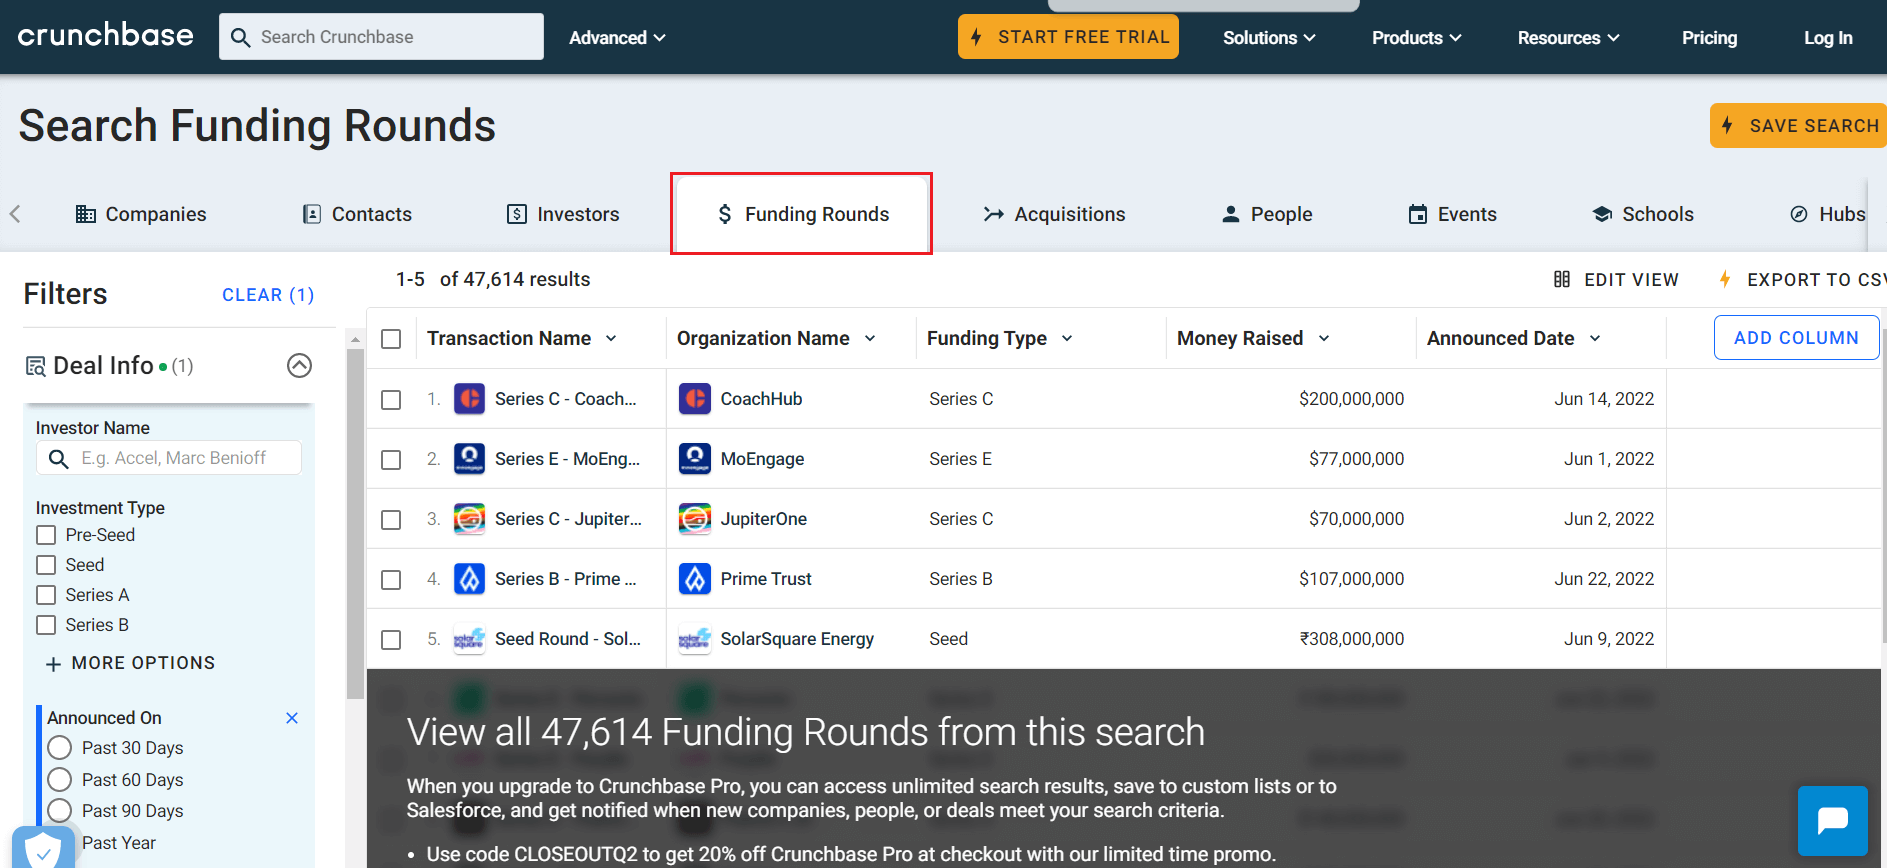 Image of Crunchbase company with funding search to find sales leads